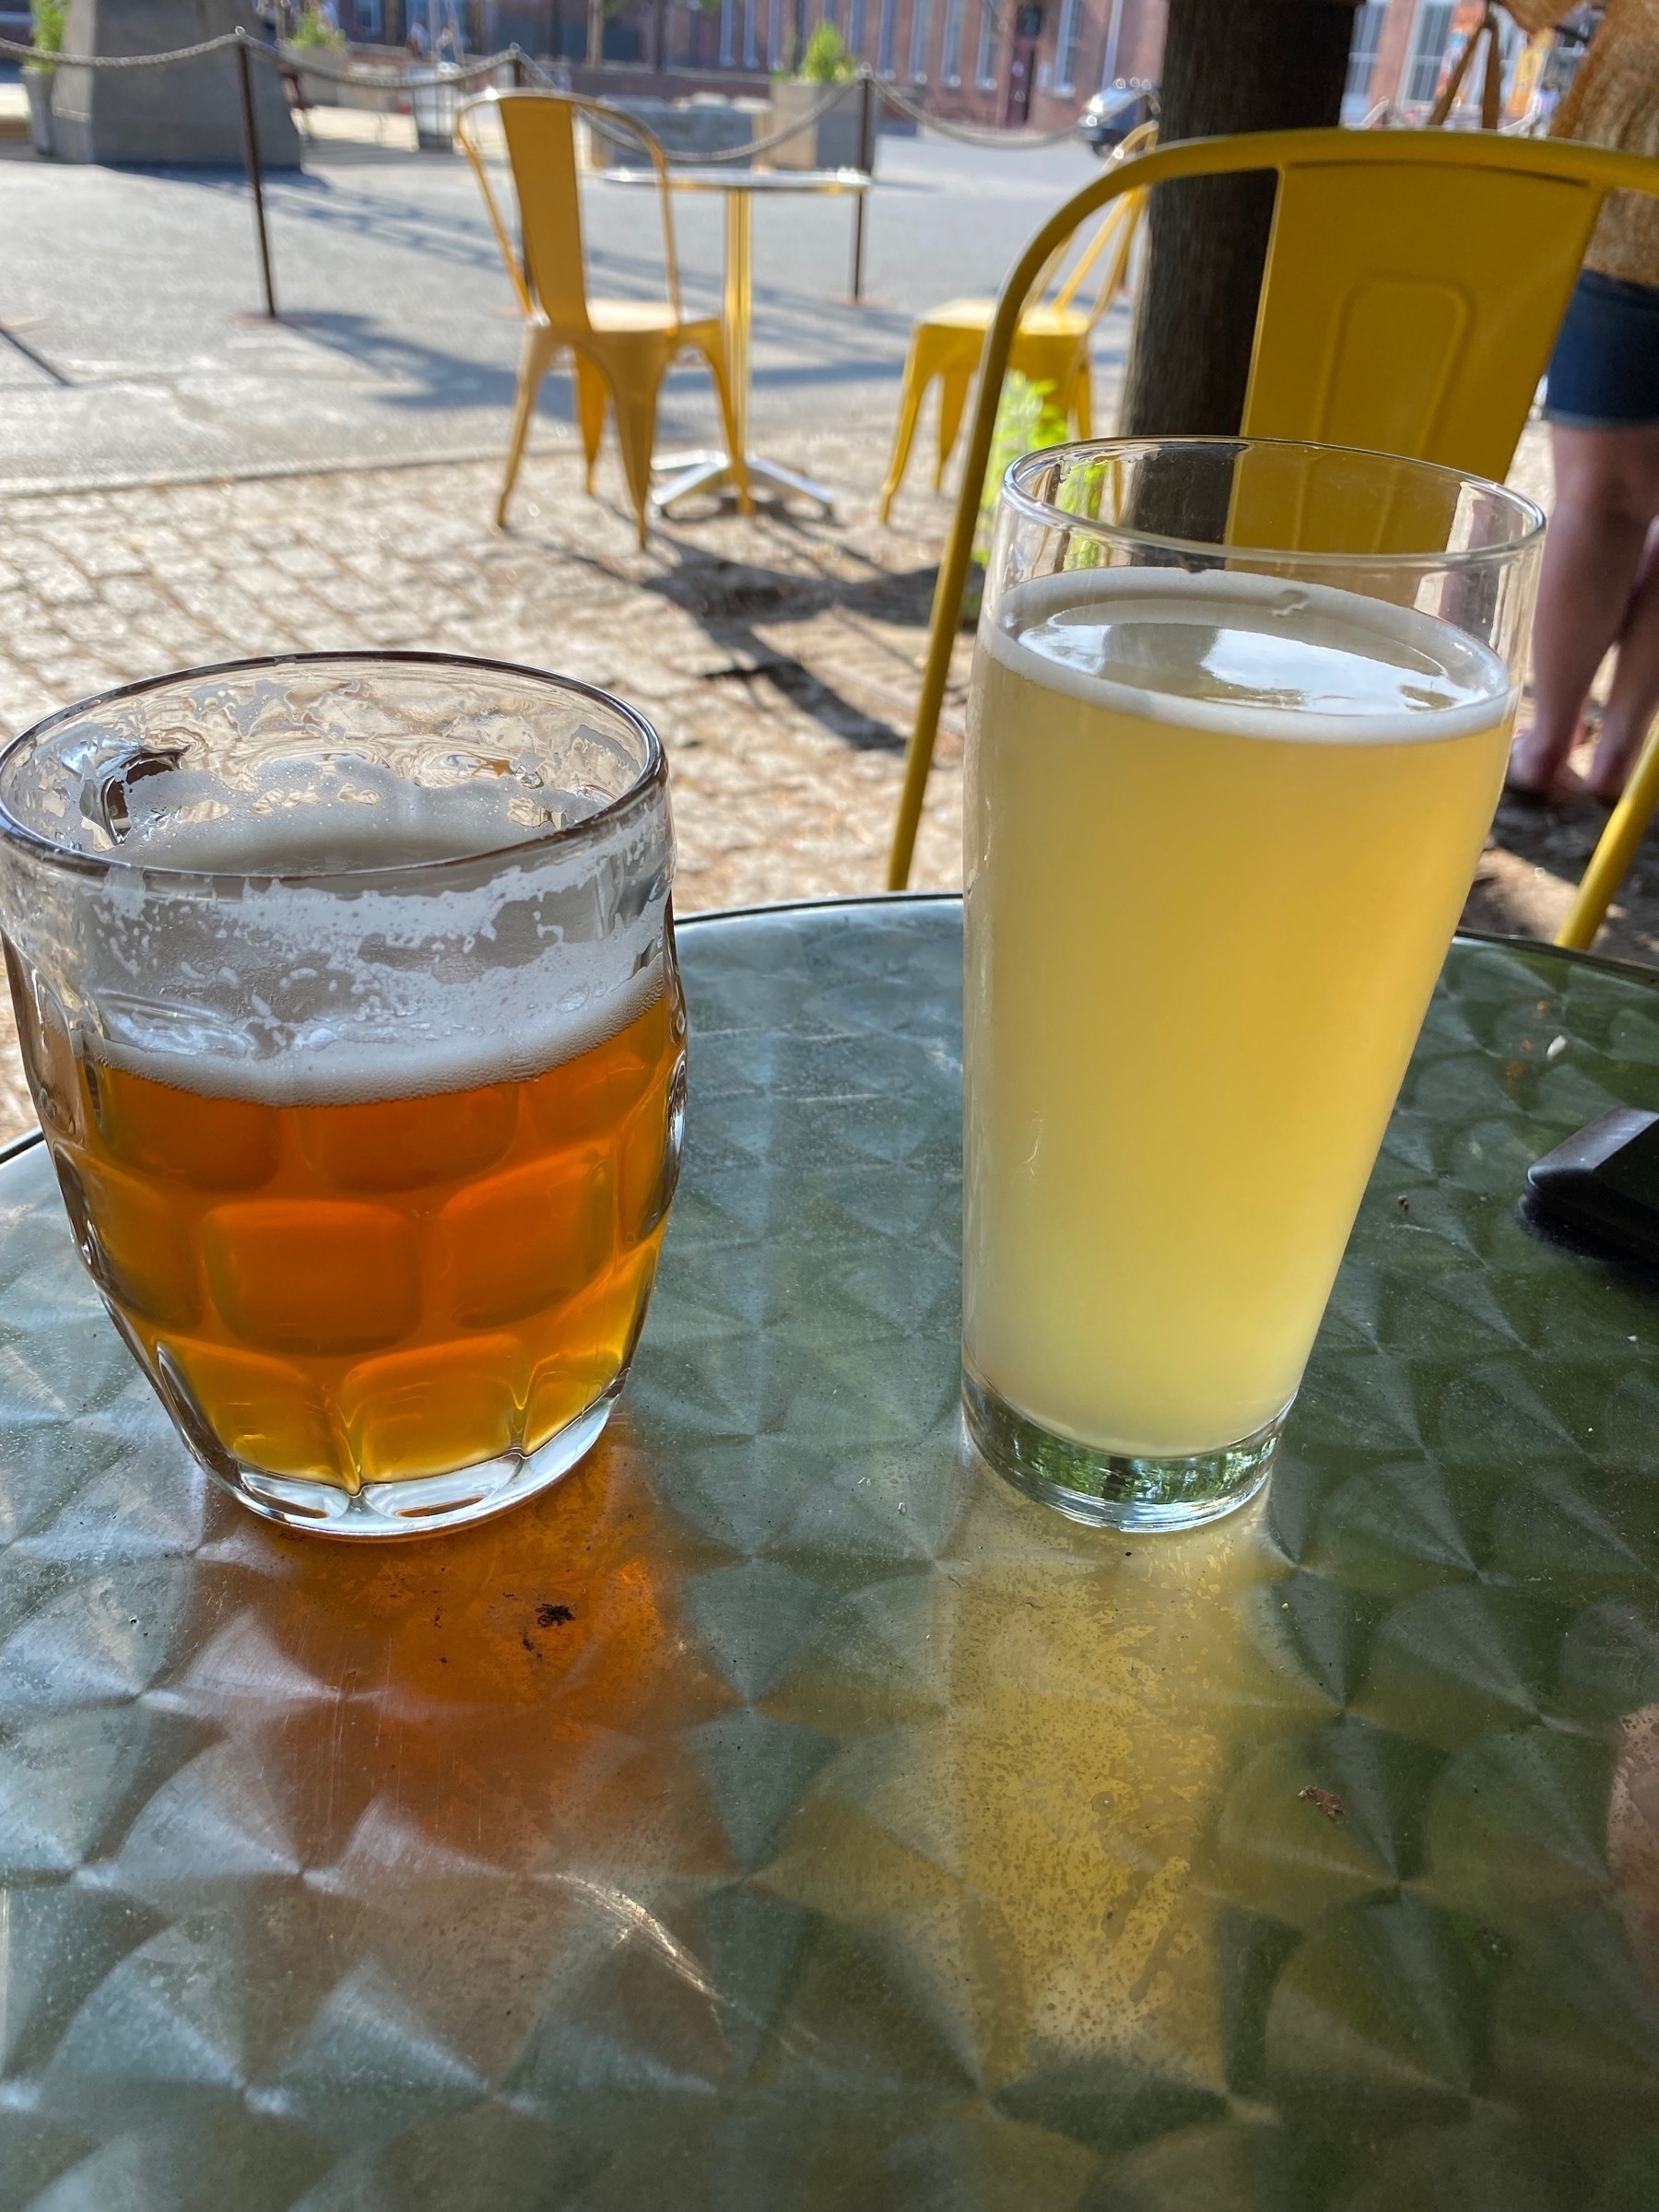 Two pints of beer on a metal table with yellow chairs in the background.